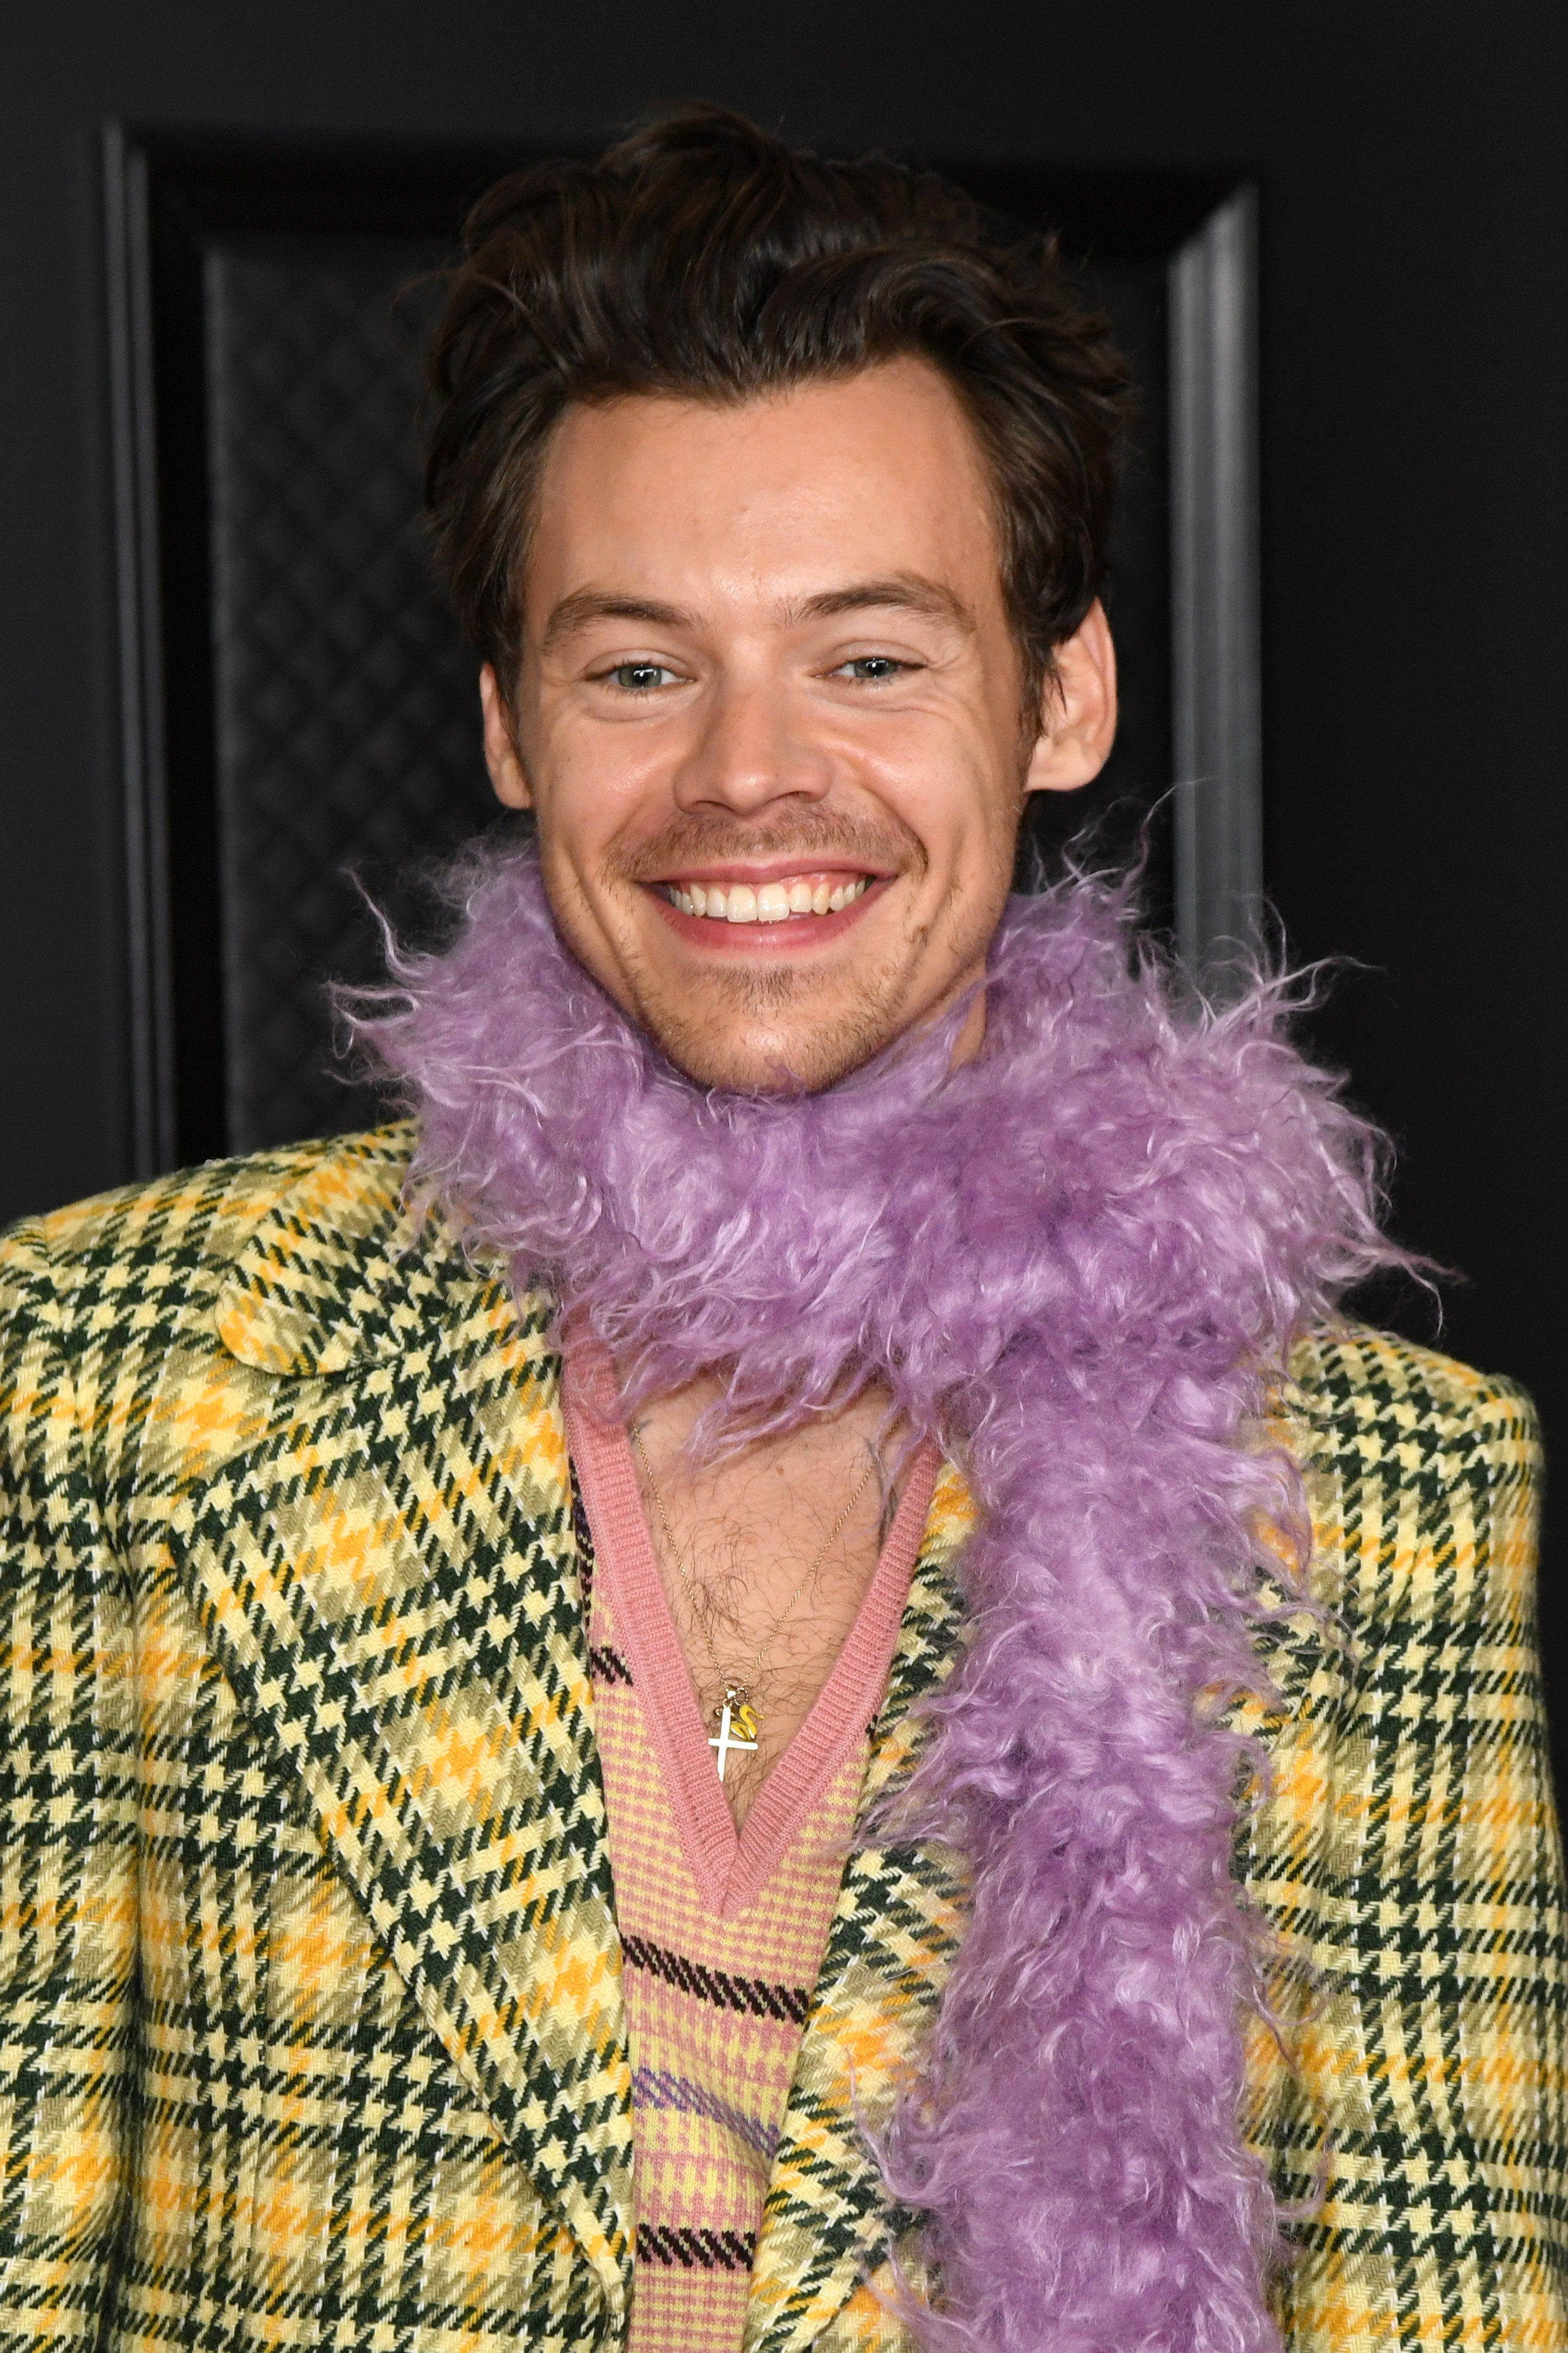 he has a checkered coat and furry purple scarf on